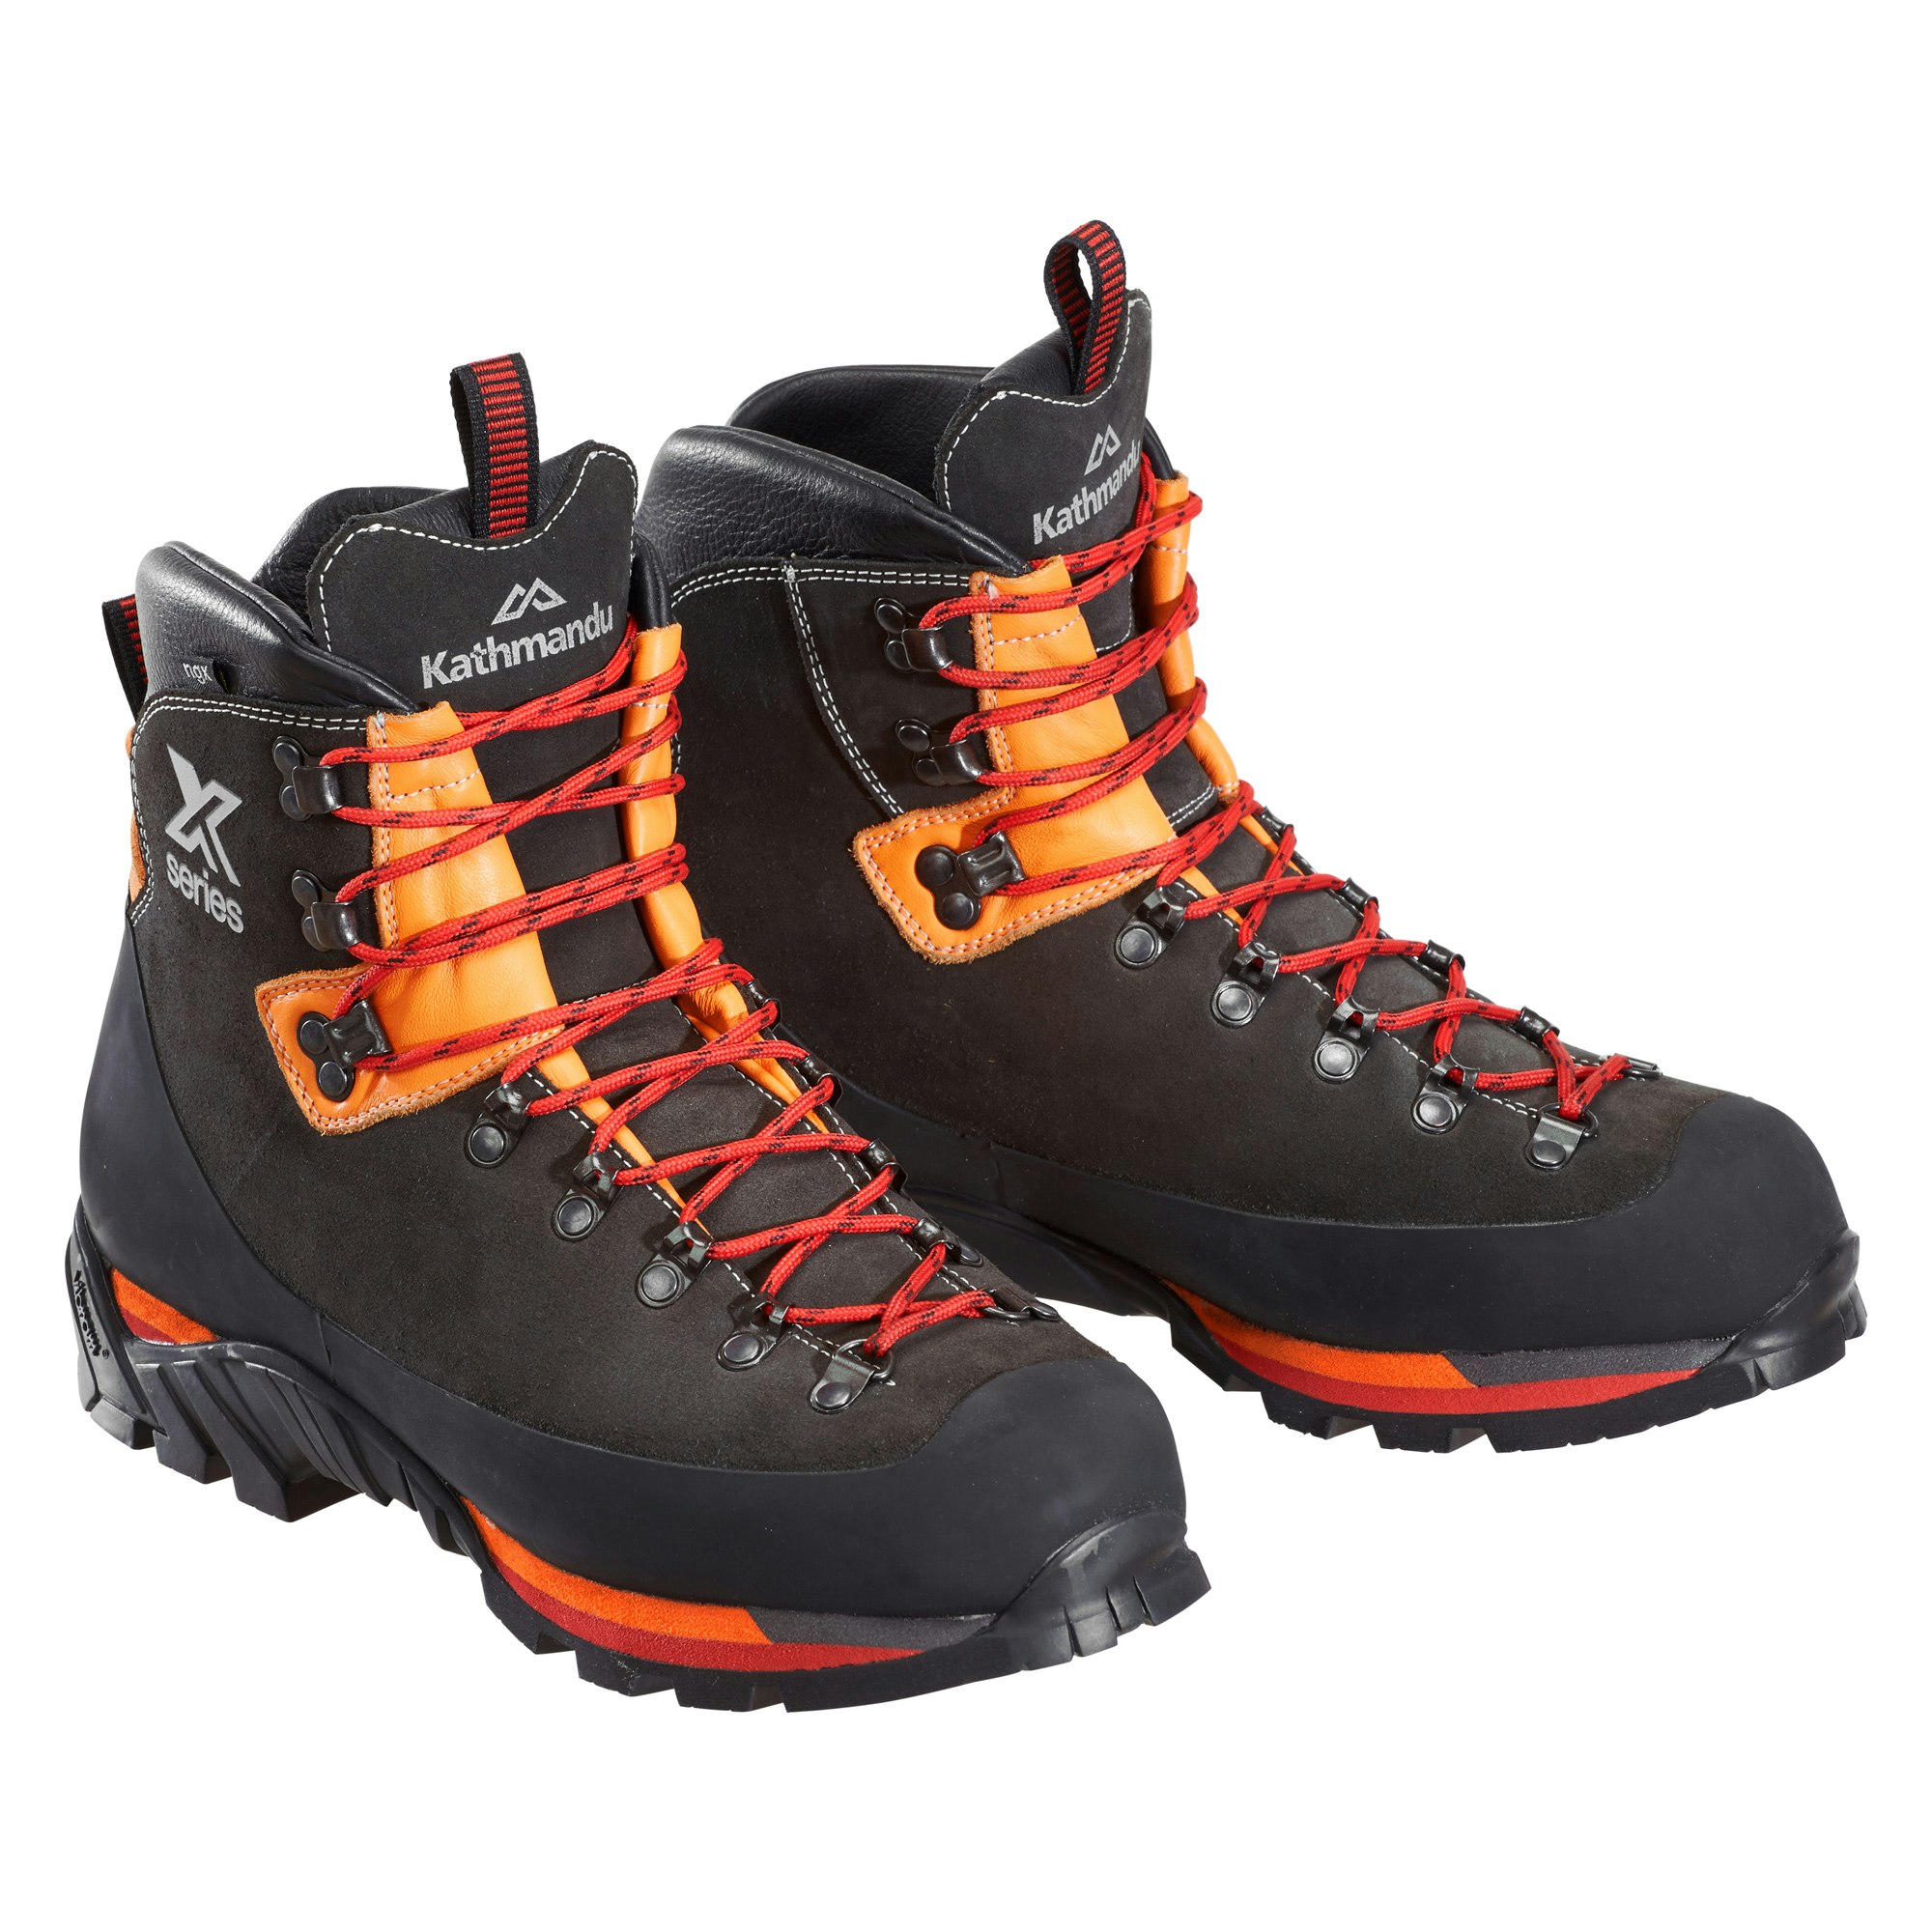 best crampon compatible hiking boots